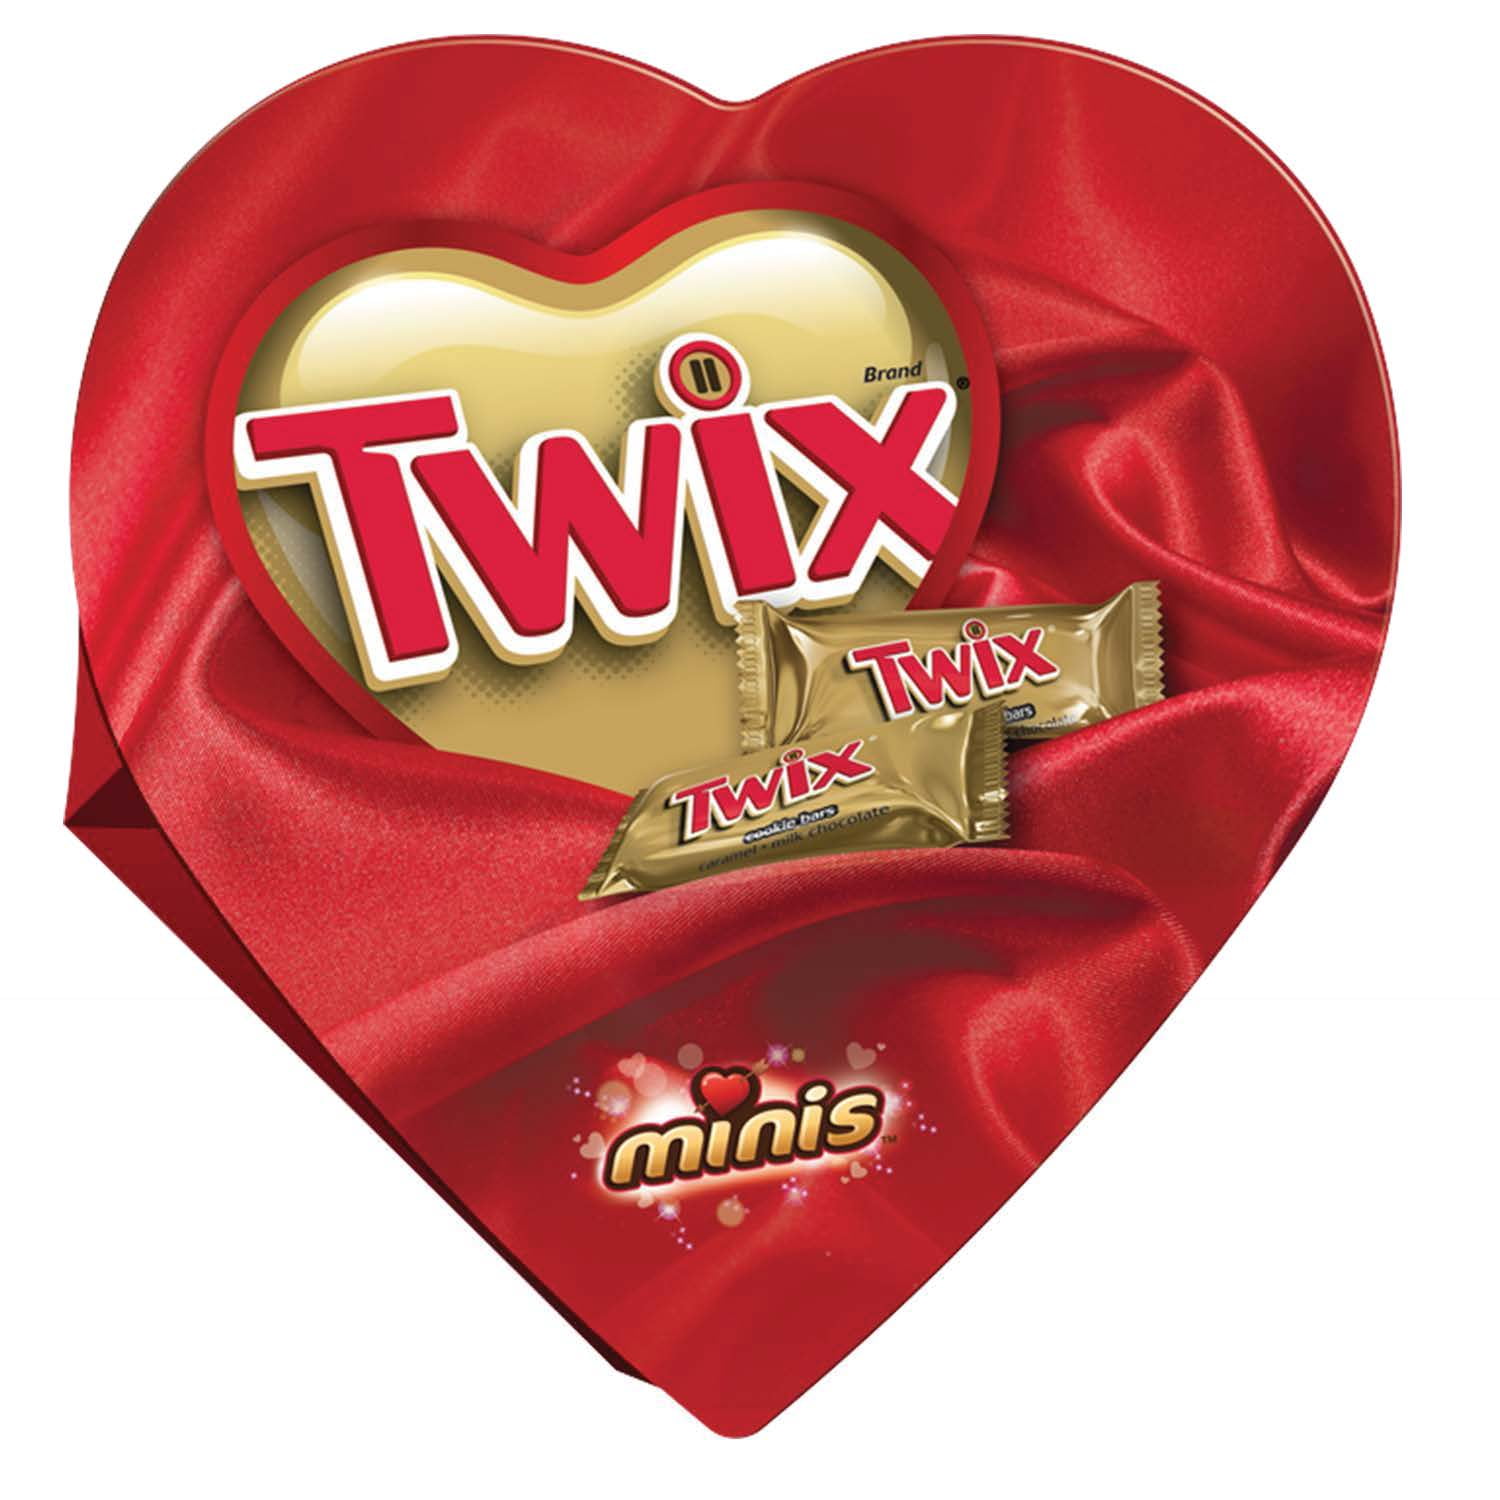 Mars Twix Minis Valentine's Day Candy Bar in Heart Shaped Box, 7.75 Oz